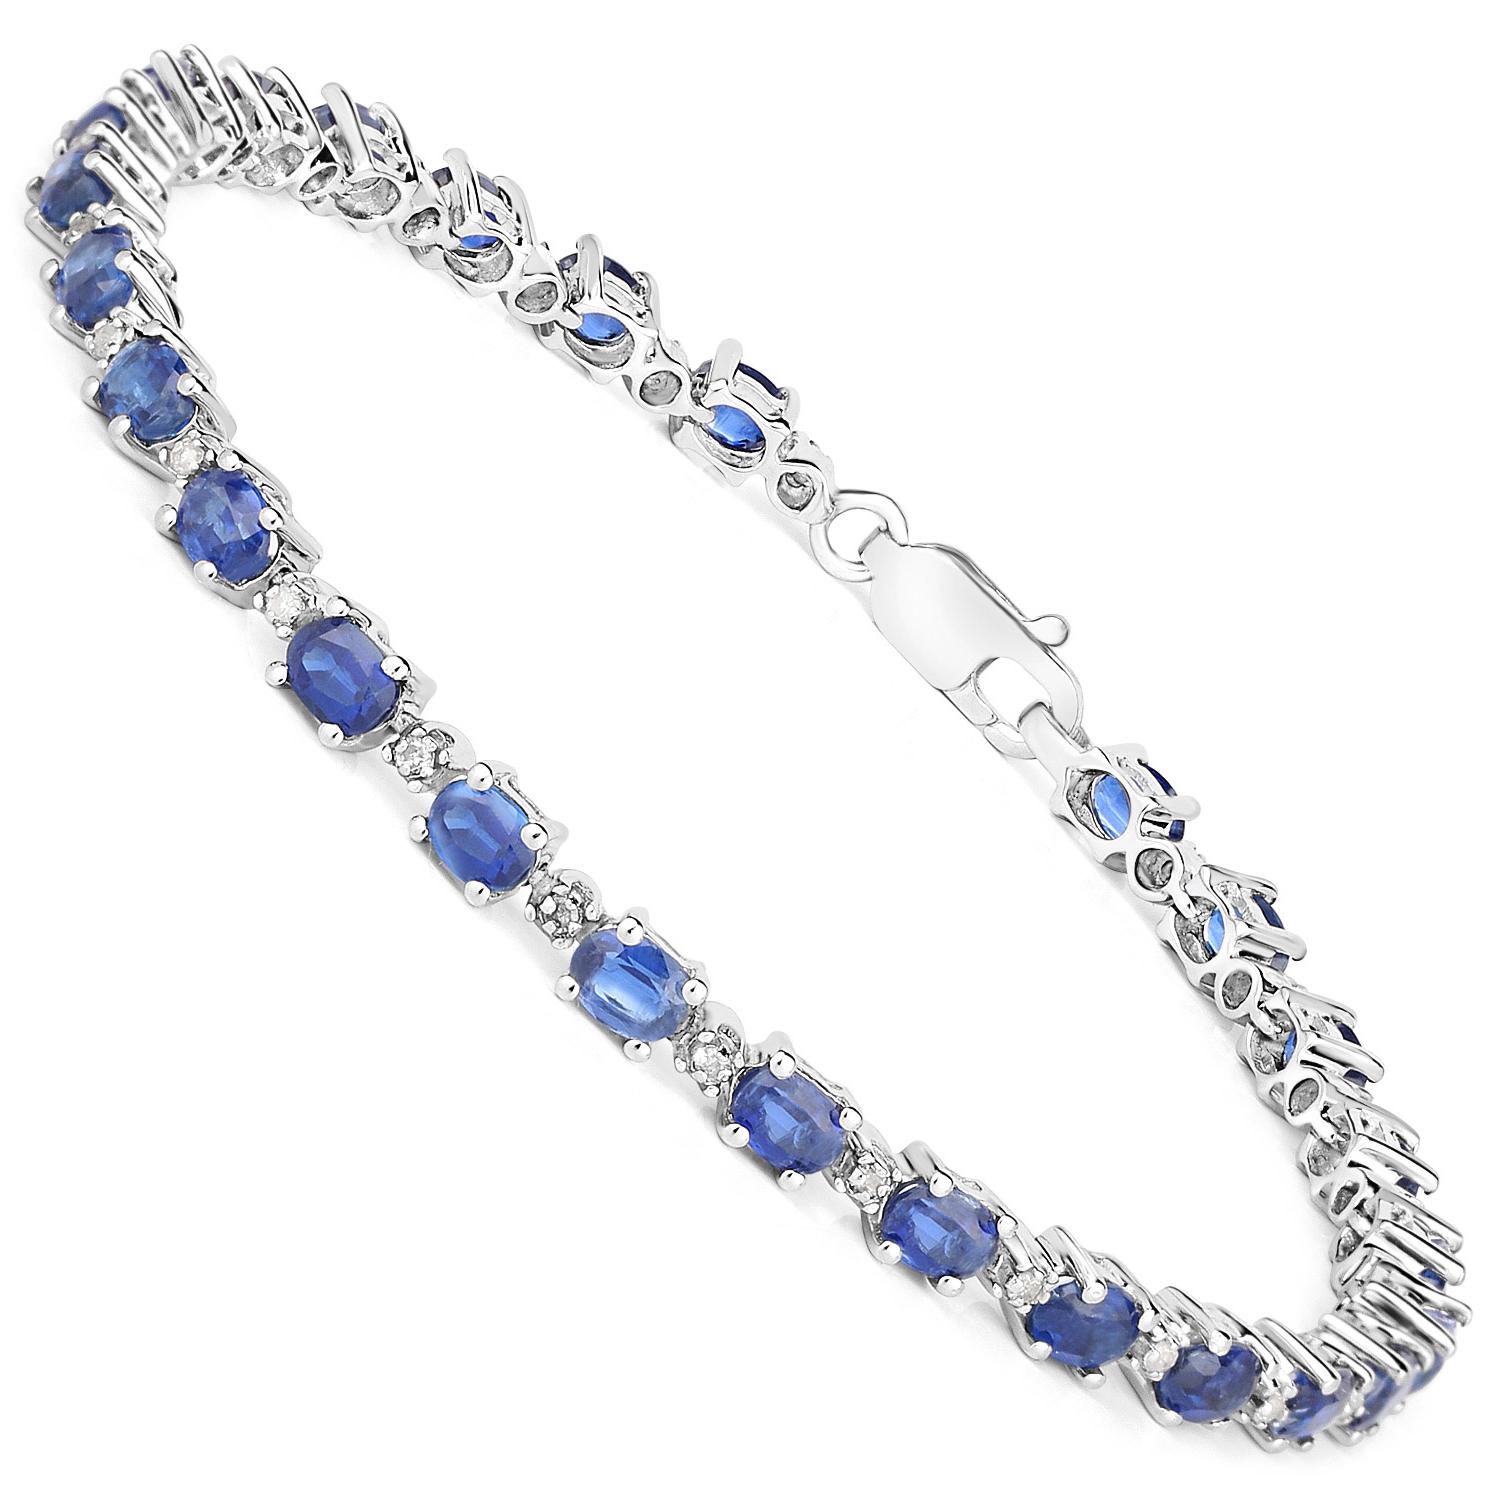 Contemporary Kyanite Tennis Bracelet With Diamonds 6.73 Carats Rhodium Plated Sterling Silver For Sale